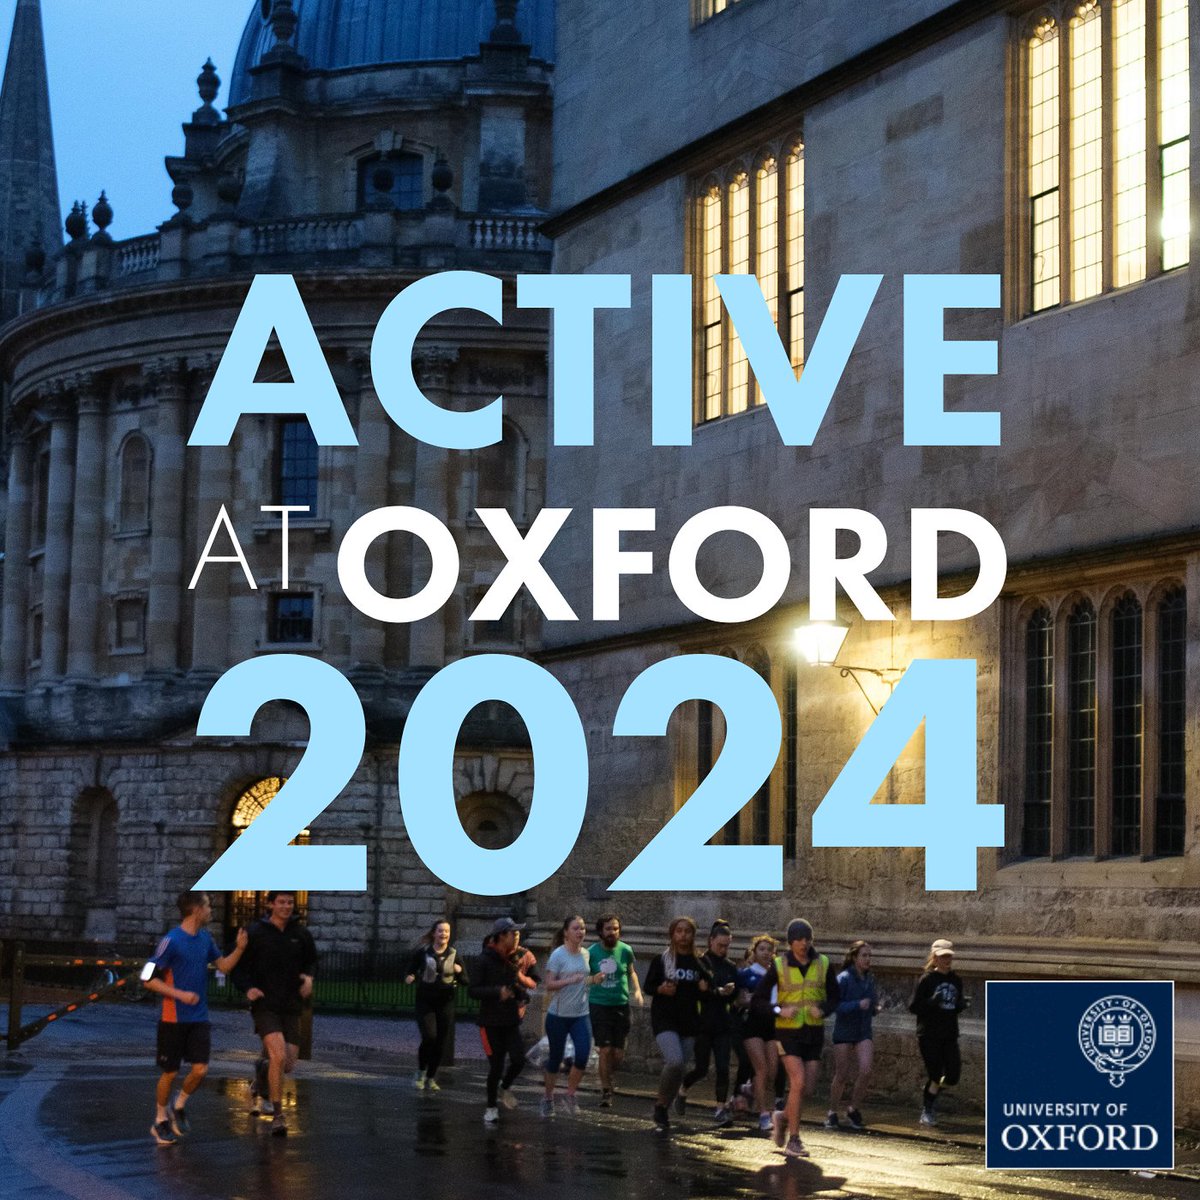 Looking to get active, meet some new people, or try a new sport this term or beyond? Check out the Active at Oxford Programme! 🧘 🚴 🚶🤸 Commitment-free, no membership required, options for all abilities across 12 different sports. Find your session ▶️ sport.ox.ac.uk/active